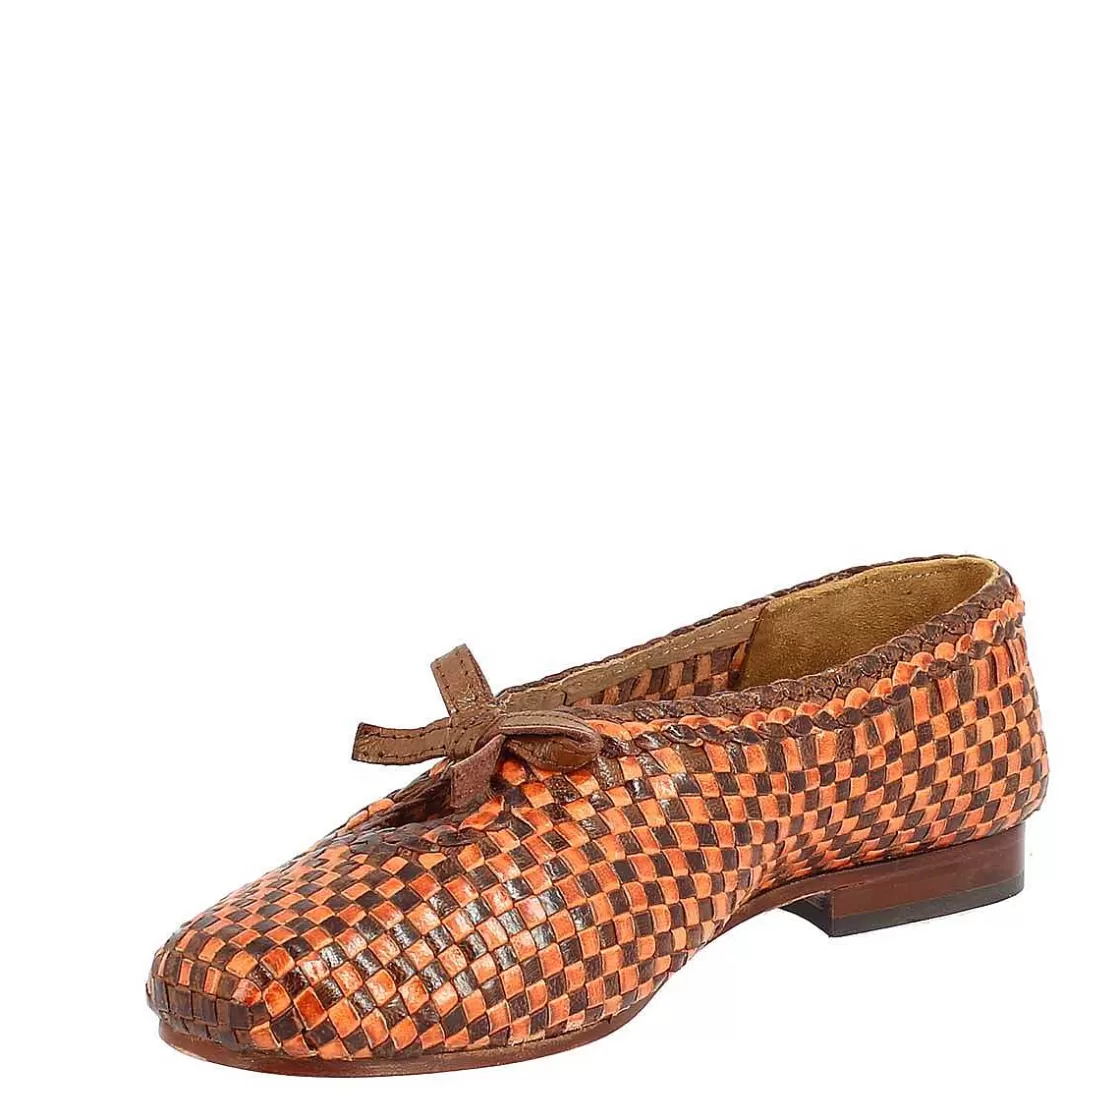 Leonardo Handmade Women'S Ballet Flats With Bow In Brown And Bronze Woven Leather Hot